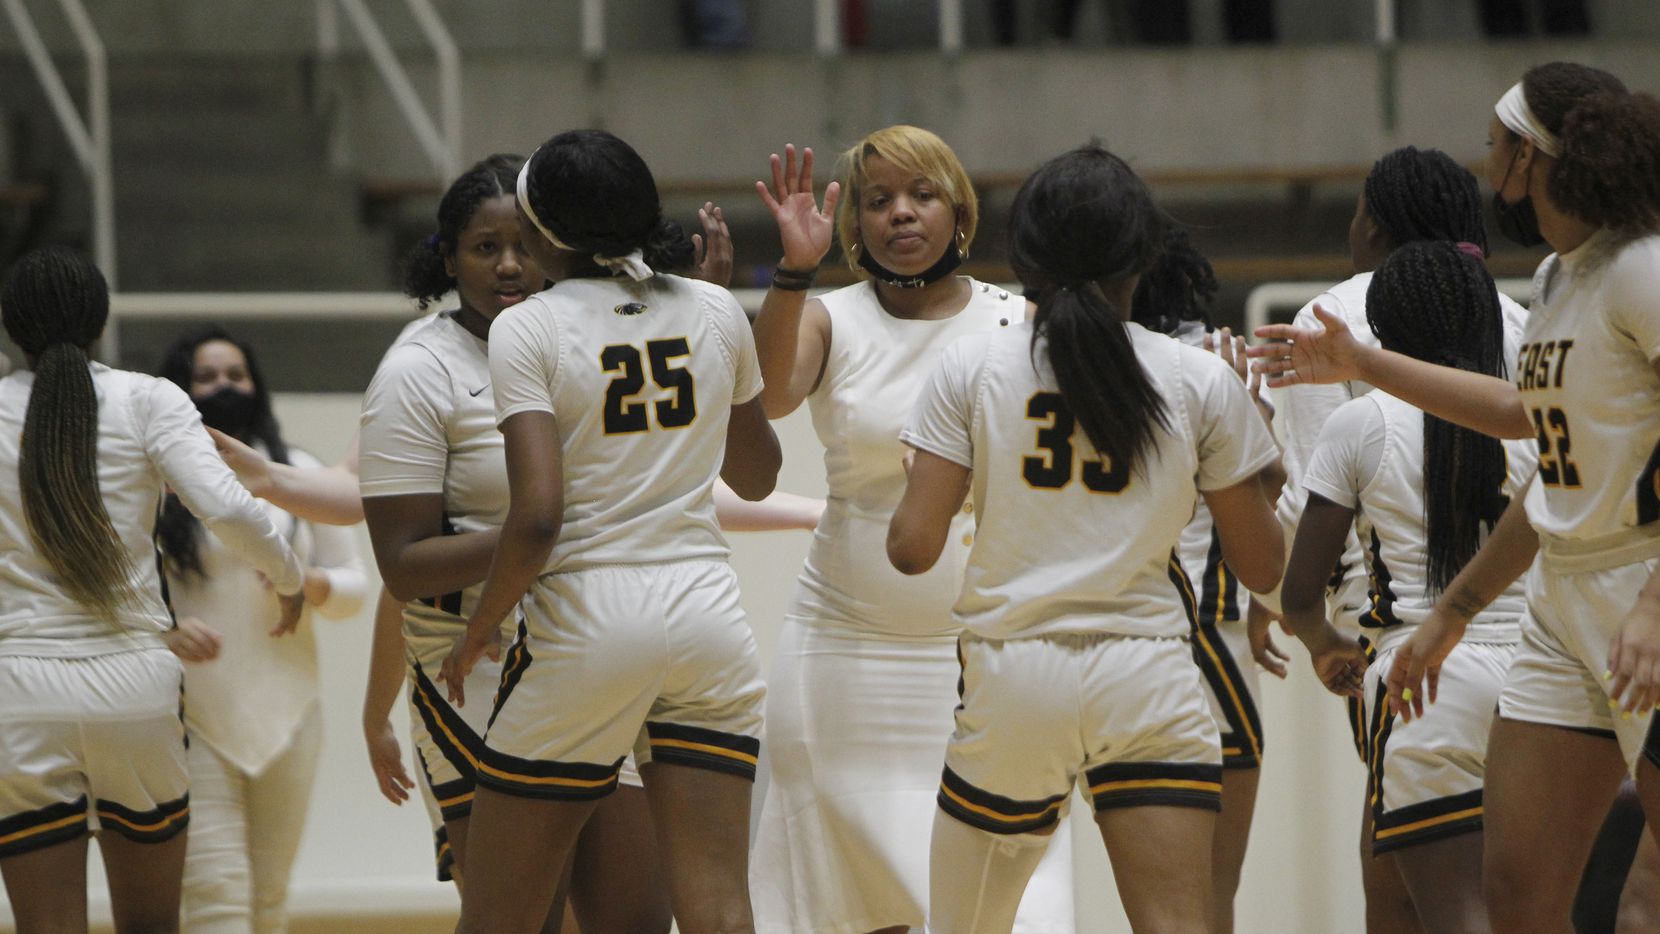 Plano East coach Jessica Linson (center) welcomes her players to the bench area during a timeout in a game against Southlake Carroll on February 27, 2021. (Steve Hamm/Special Contributor)